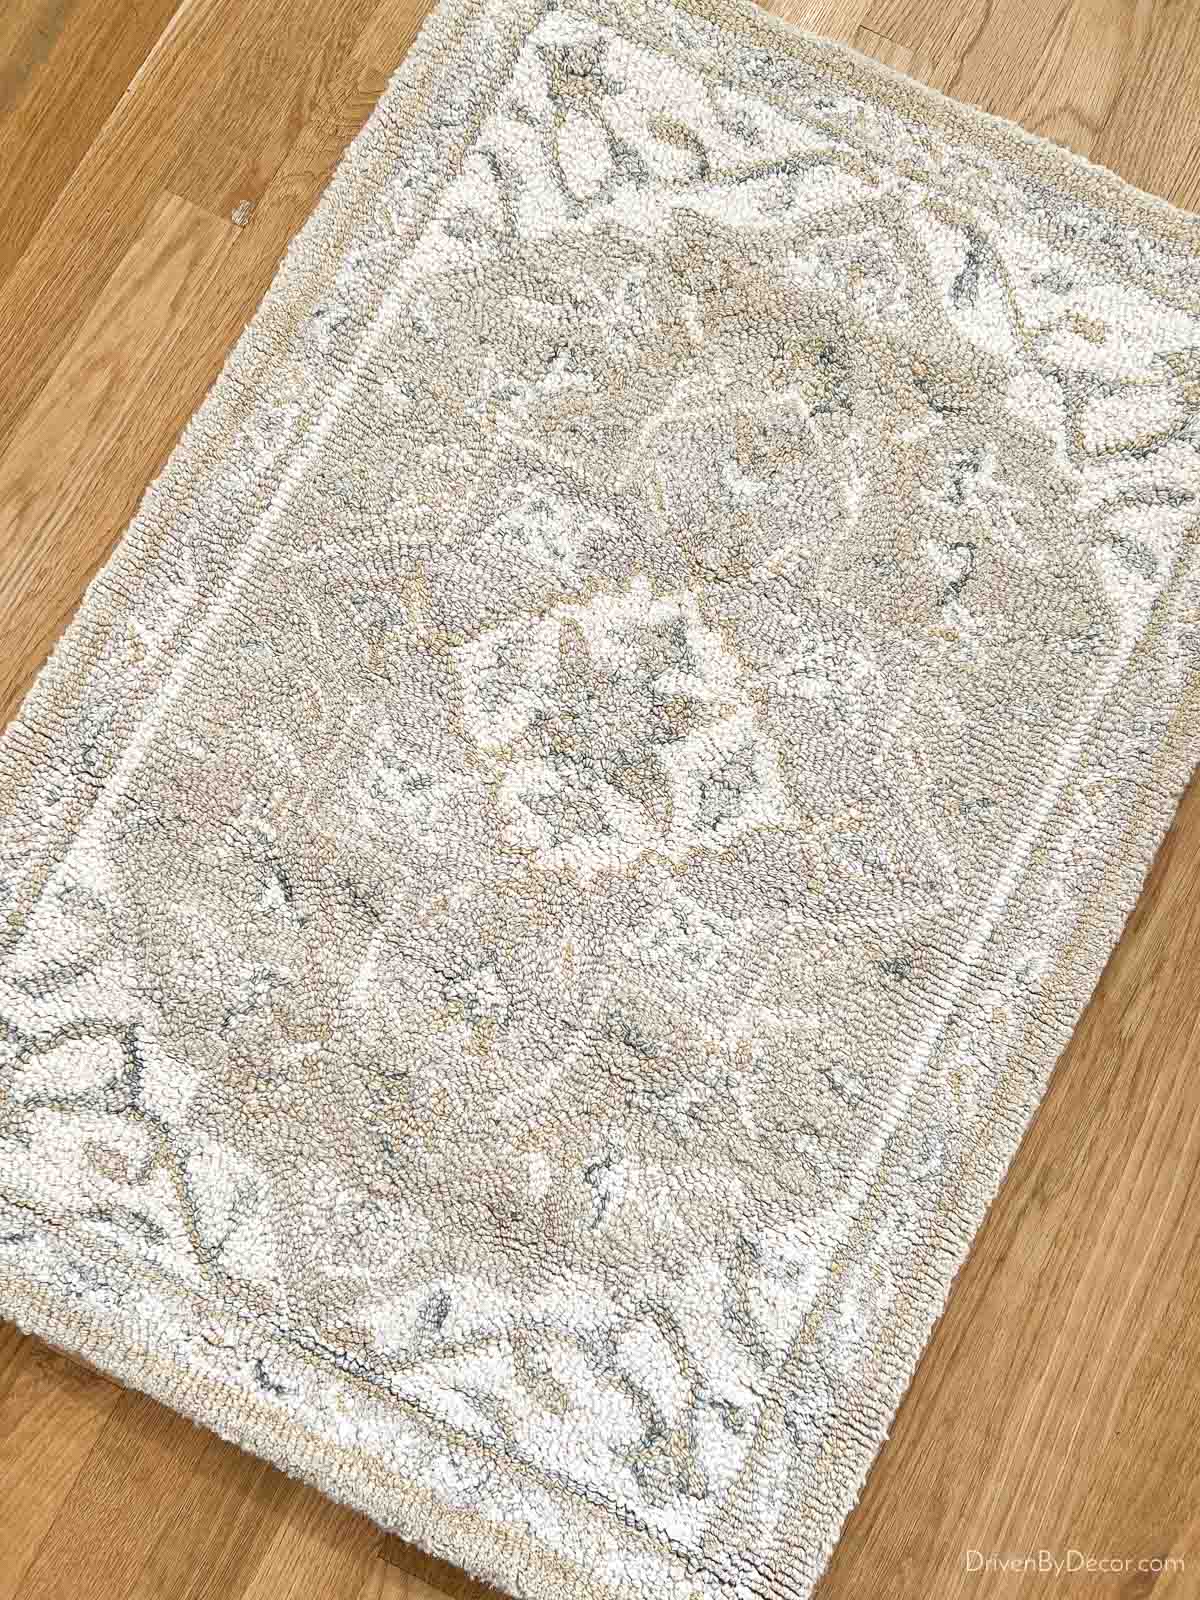 Neutral patterned area rug with gray and ivory colors